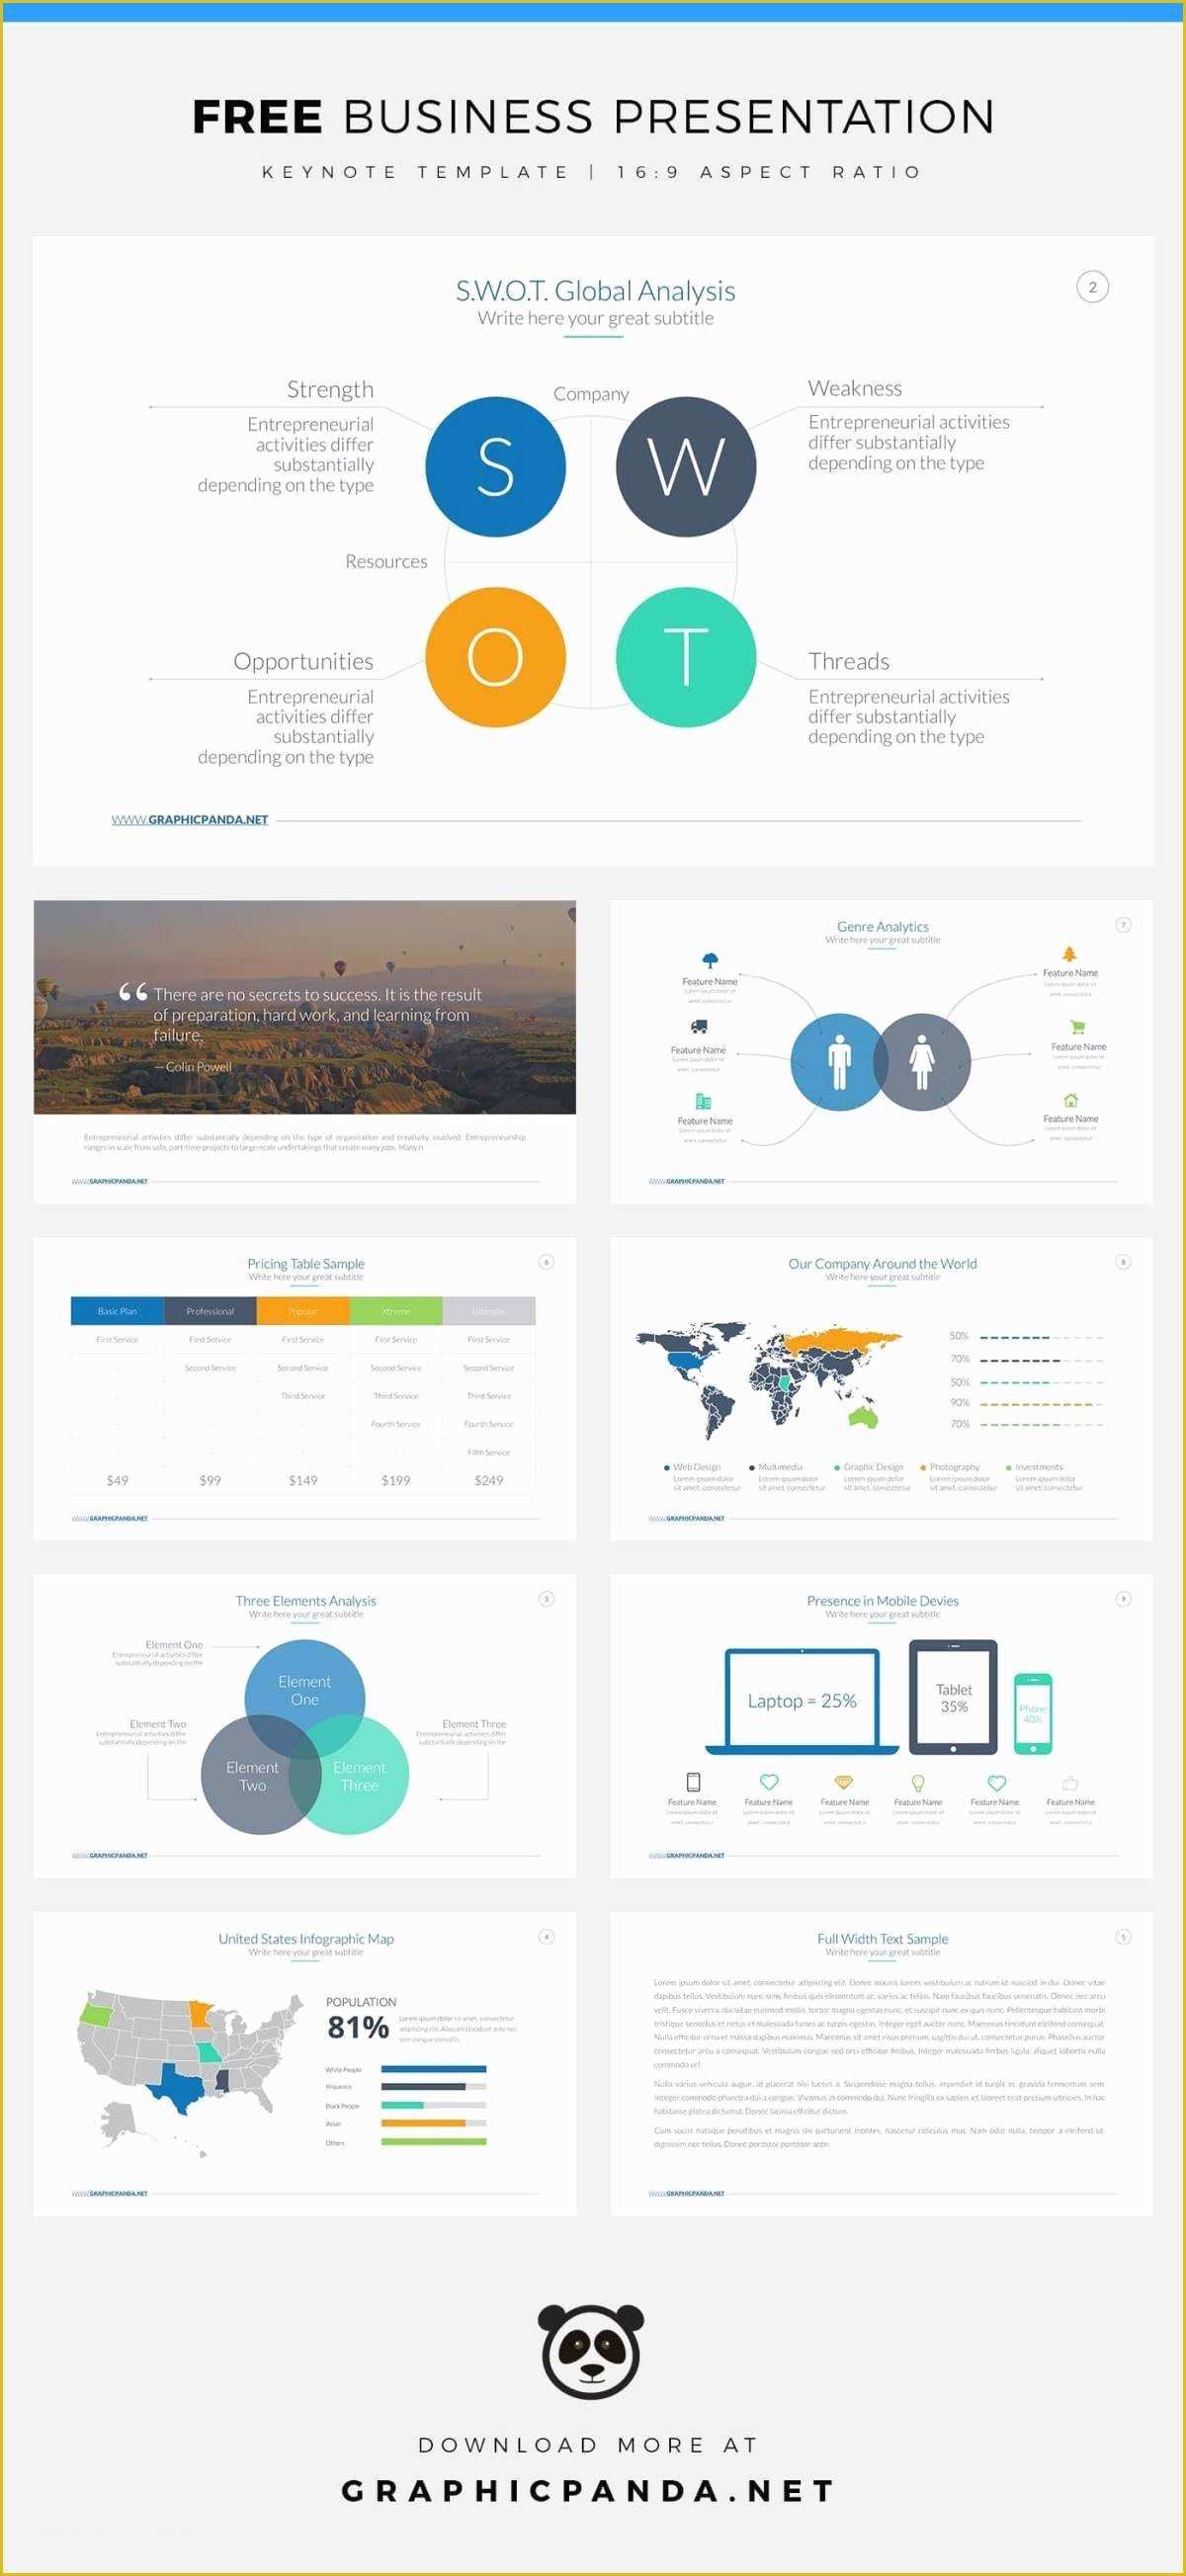 Free Keynote Templates Of Free Business Keynote Template Created by Louistwelve